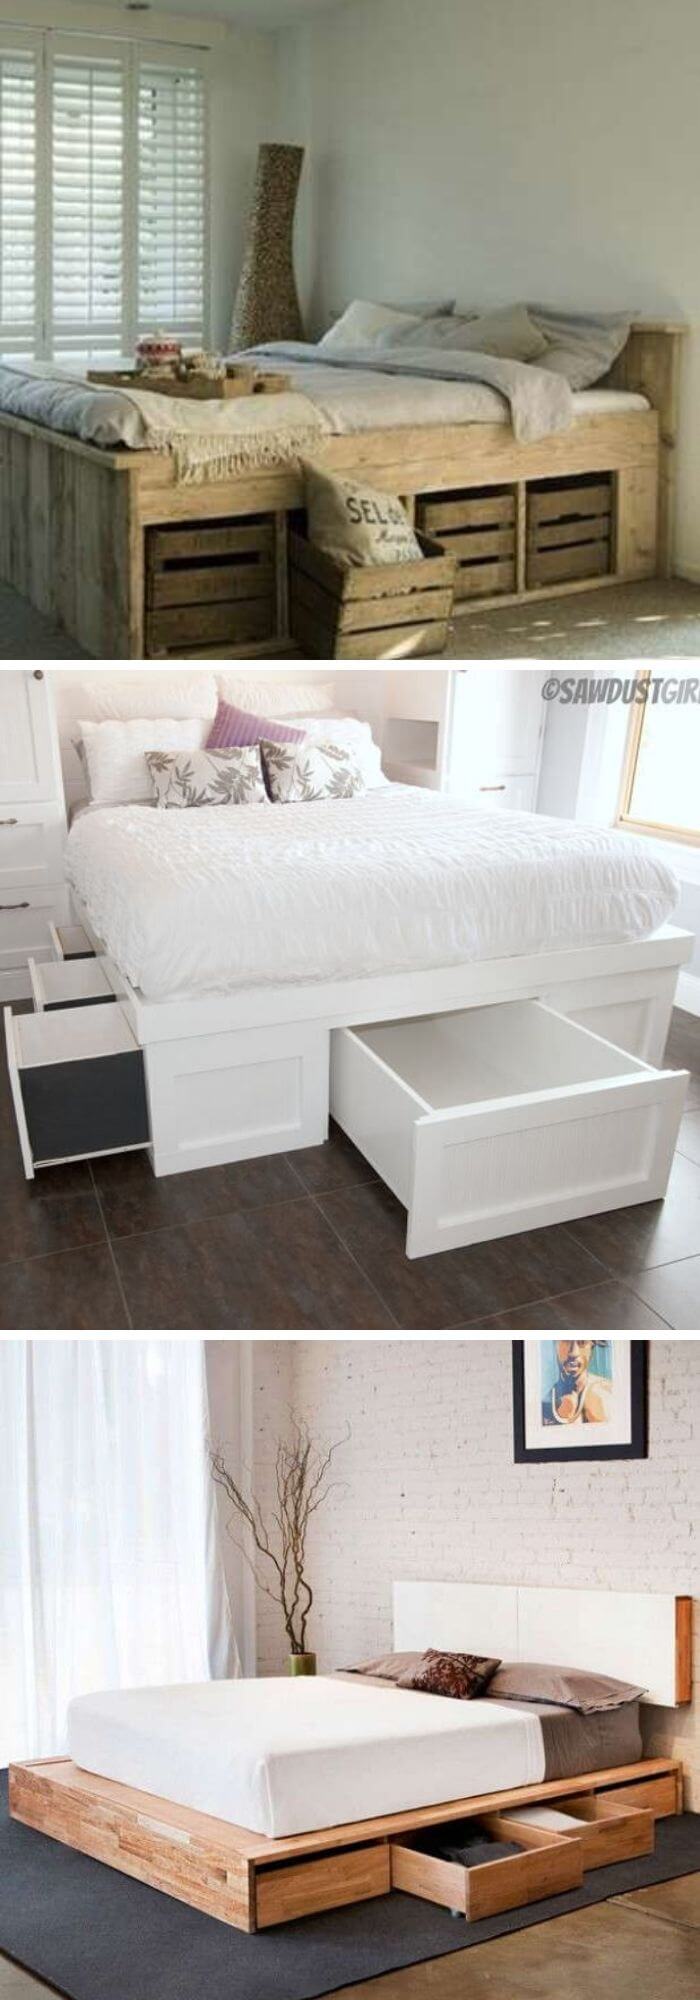 23 Clever Diy Bed Frame Ideas And, Diy Rustic Queen Bed Frame With Storage Box Spring